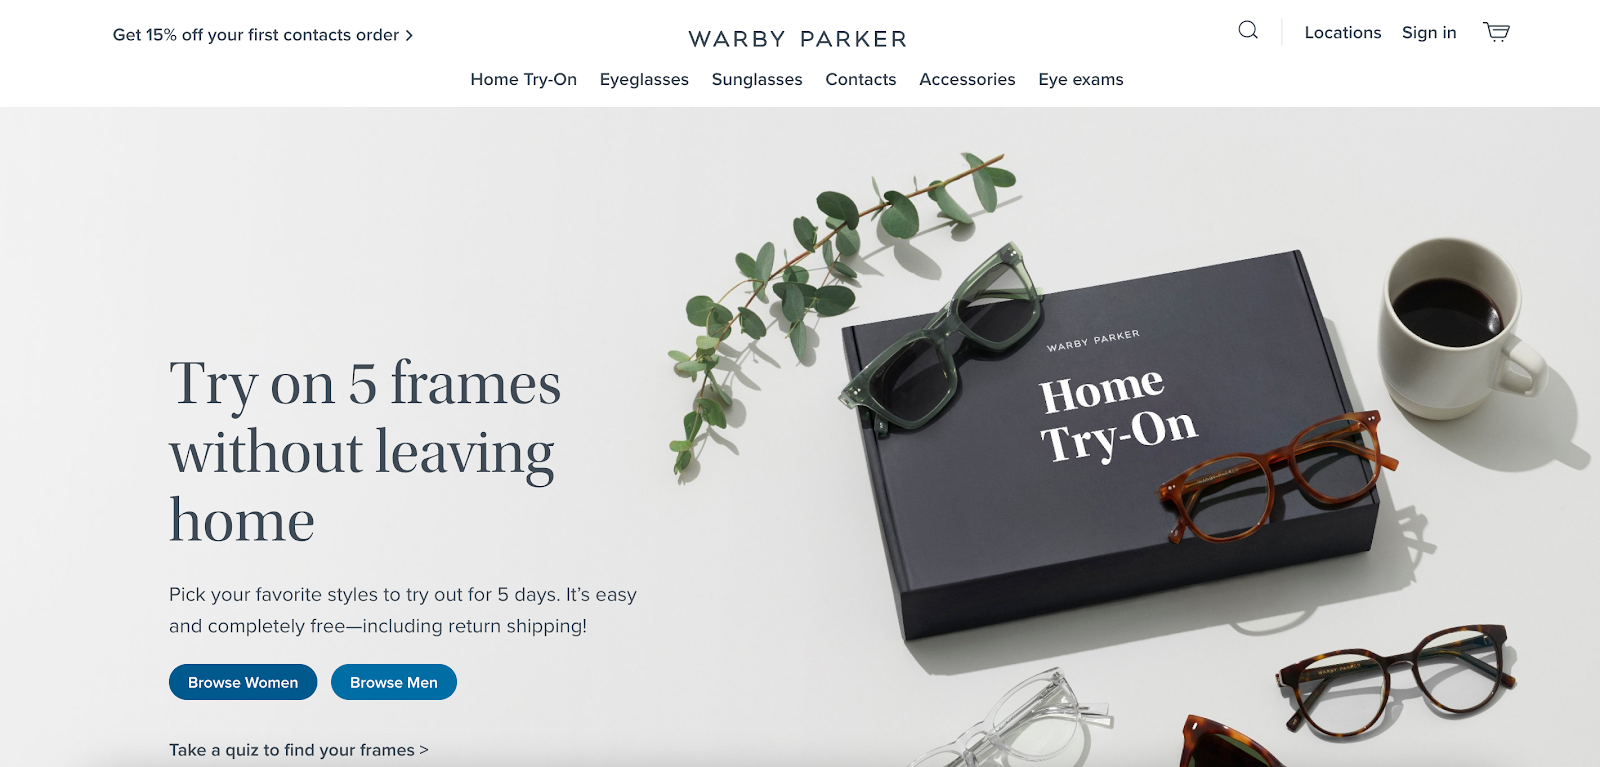 Hero image example from Warby Parker